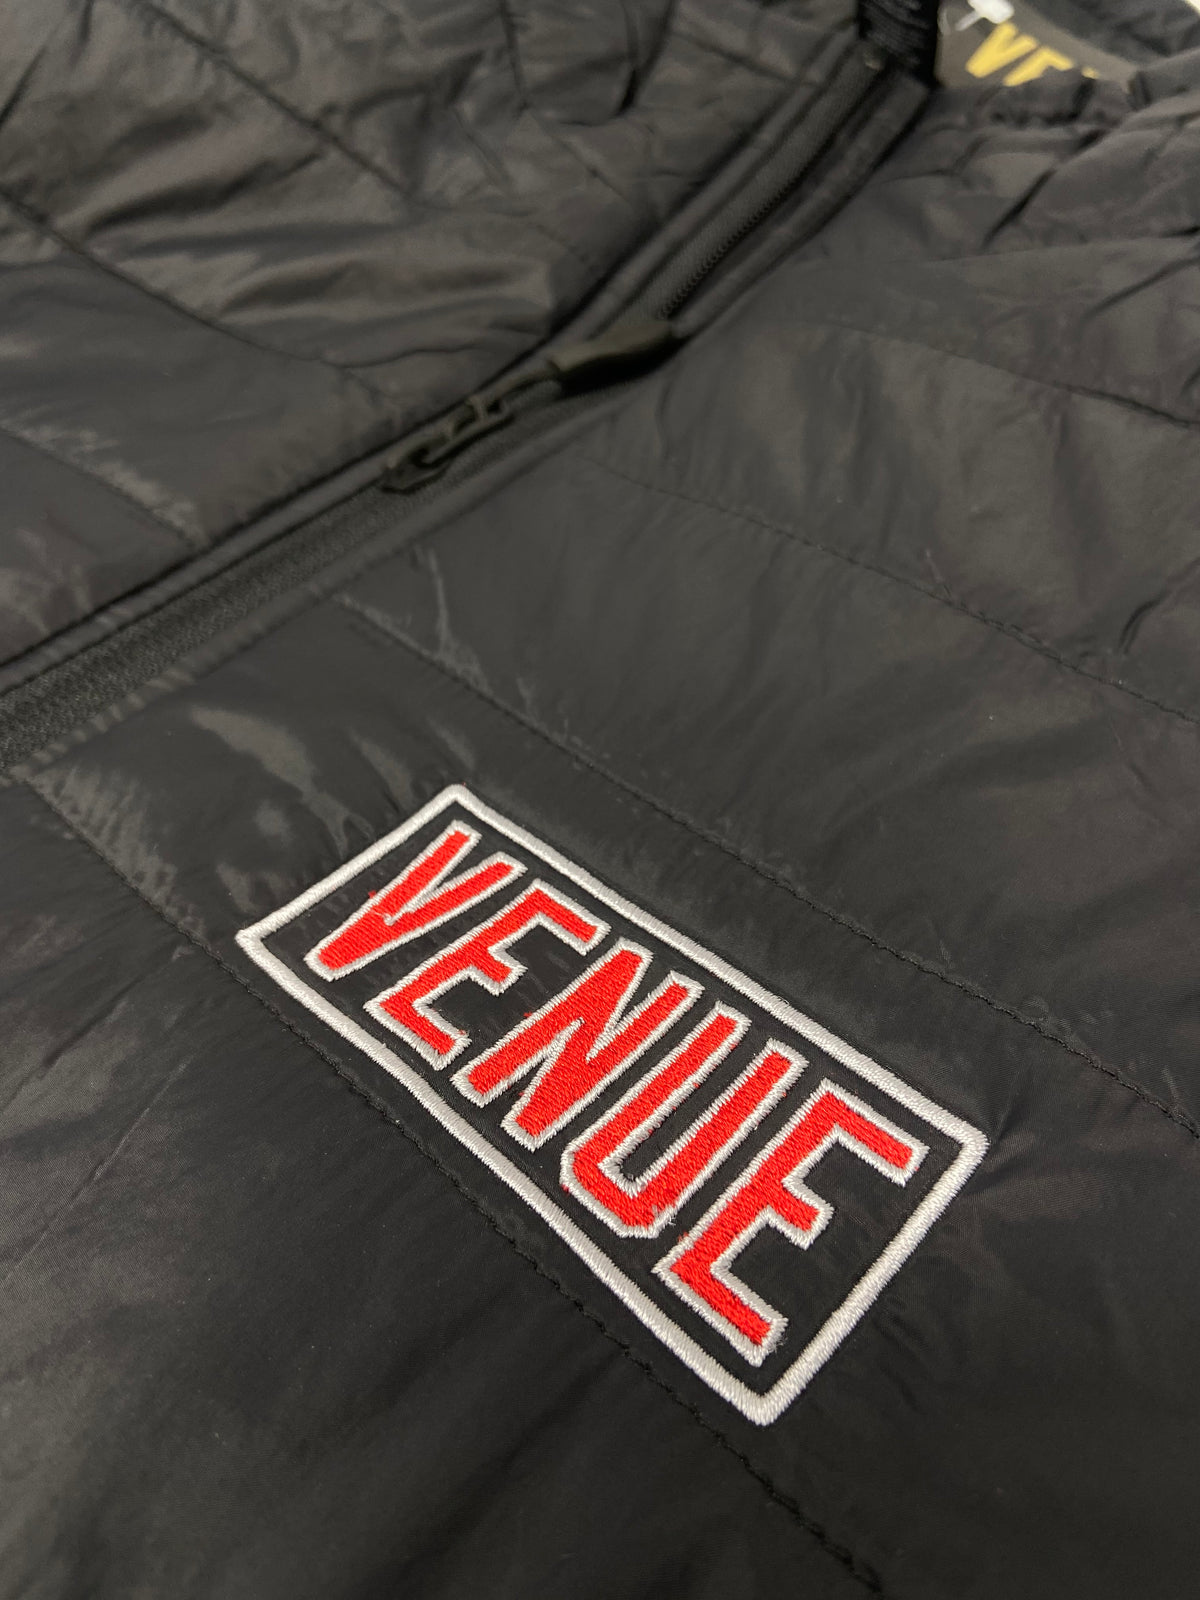 Venue Embroidered Puffy Jacket Black